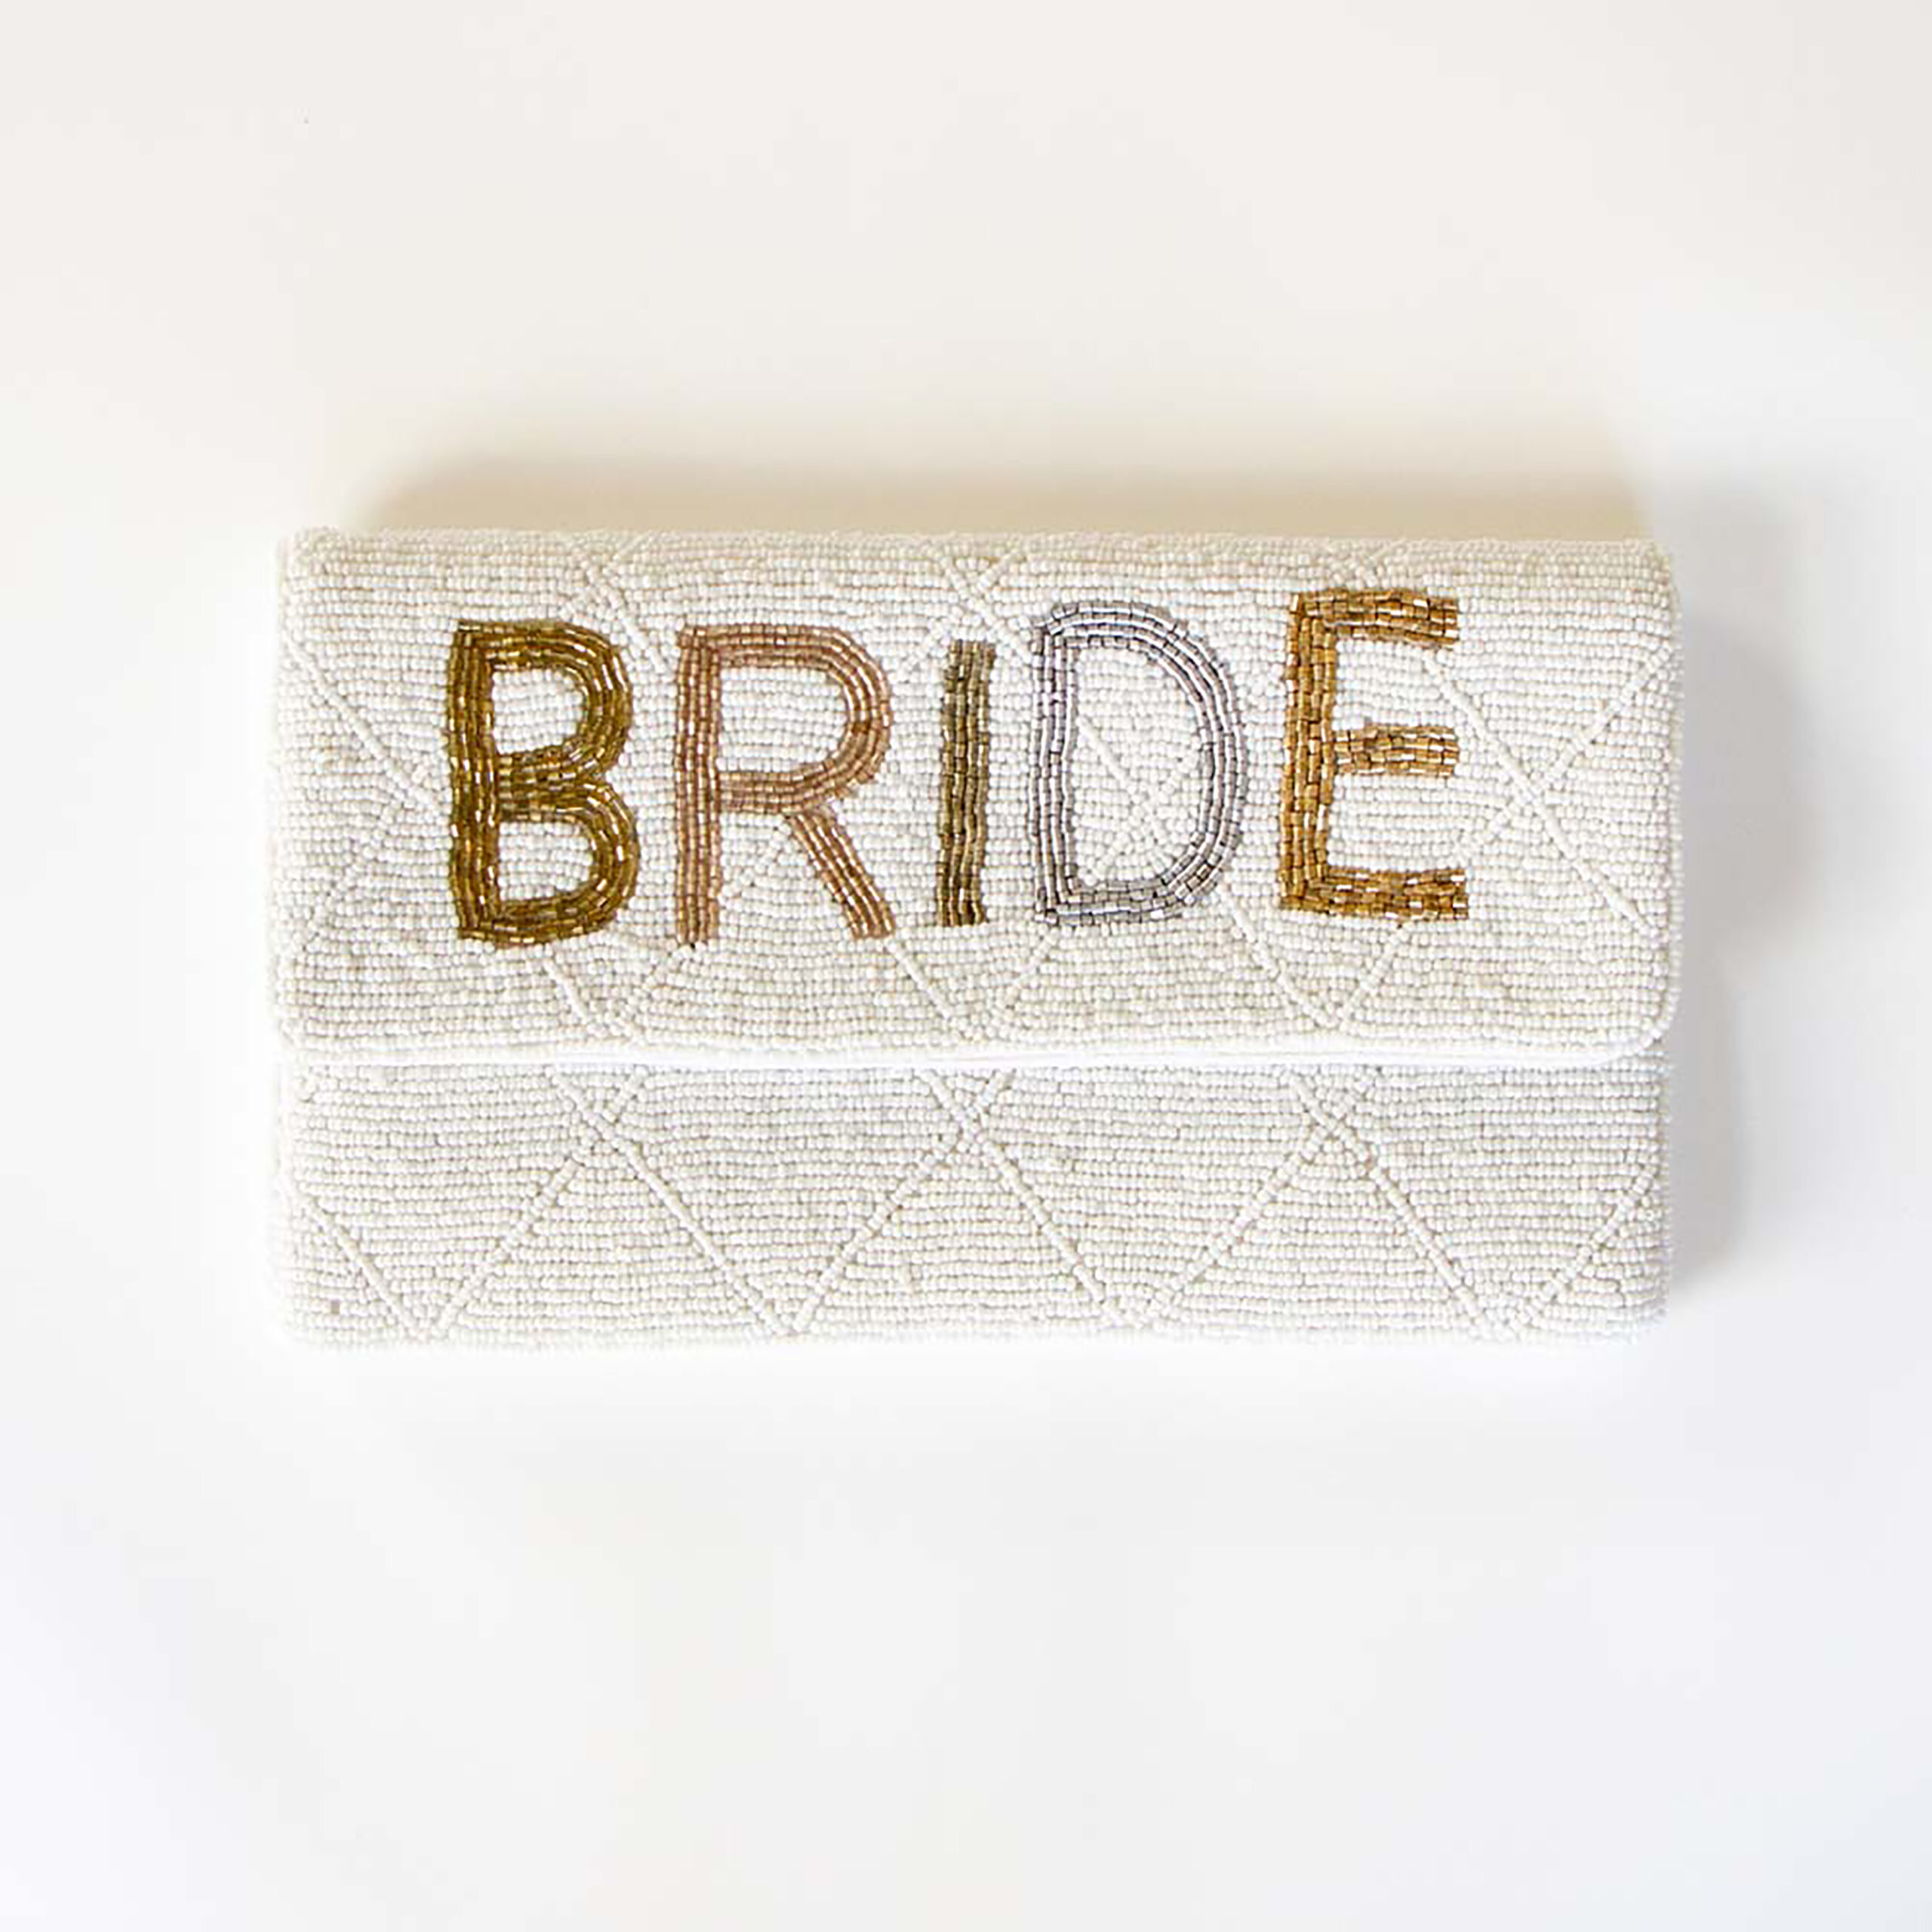 This beaded bride clutch is a unique accessory for the bride.